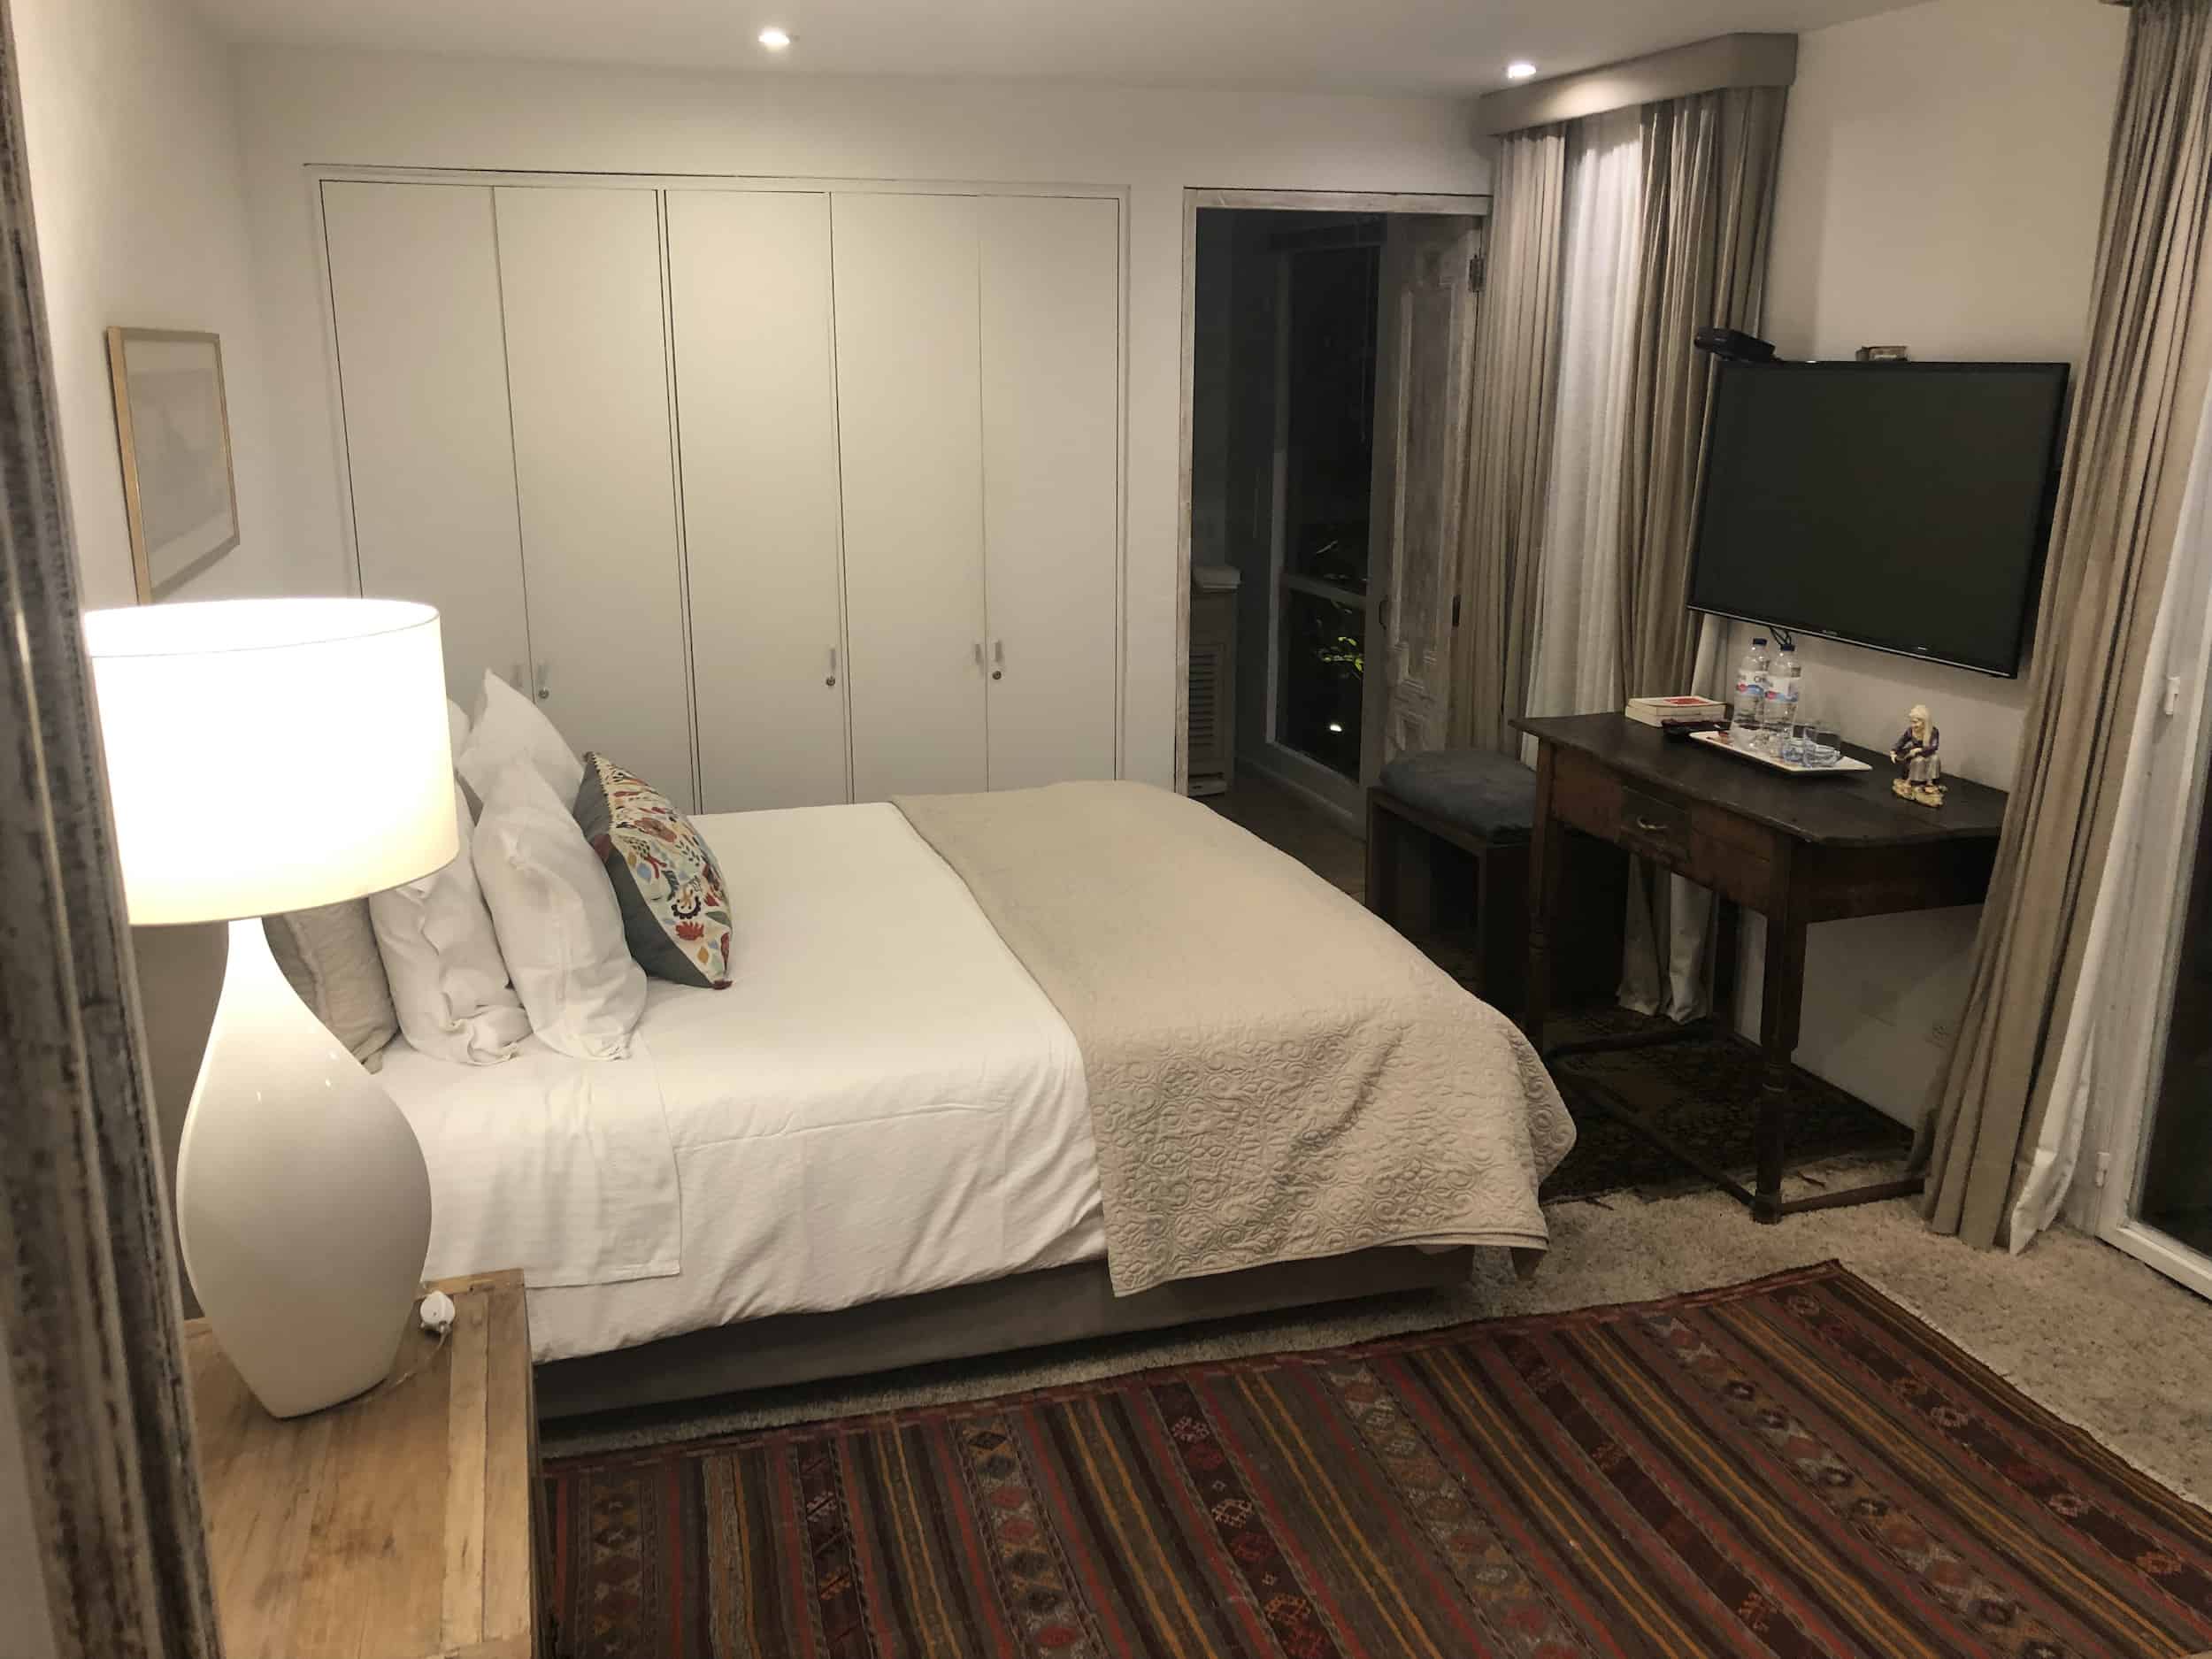 Deluxe room at Candelaria House Boutique in Bogotá, Colombia